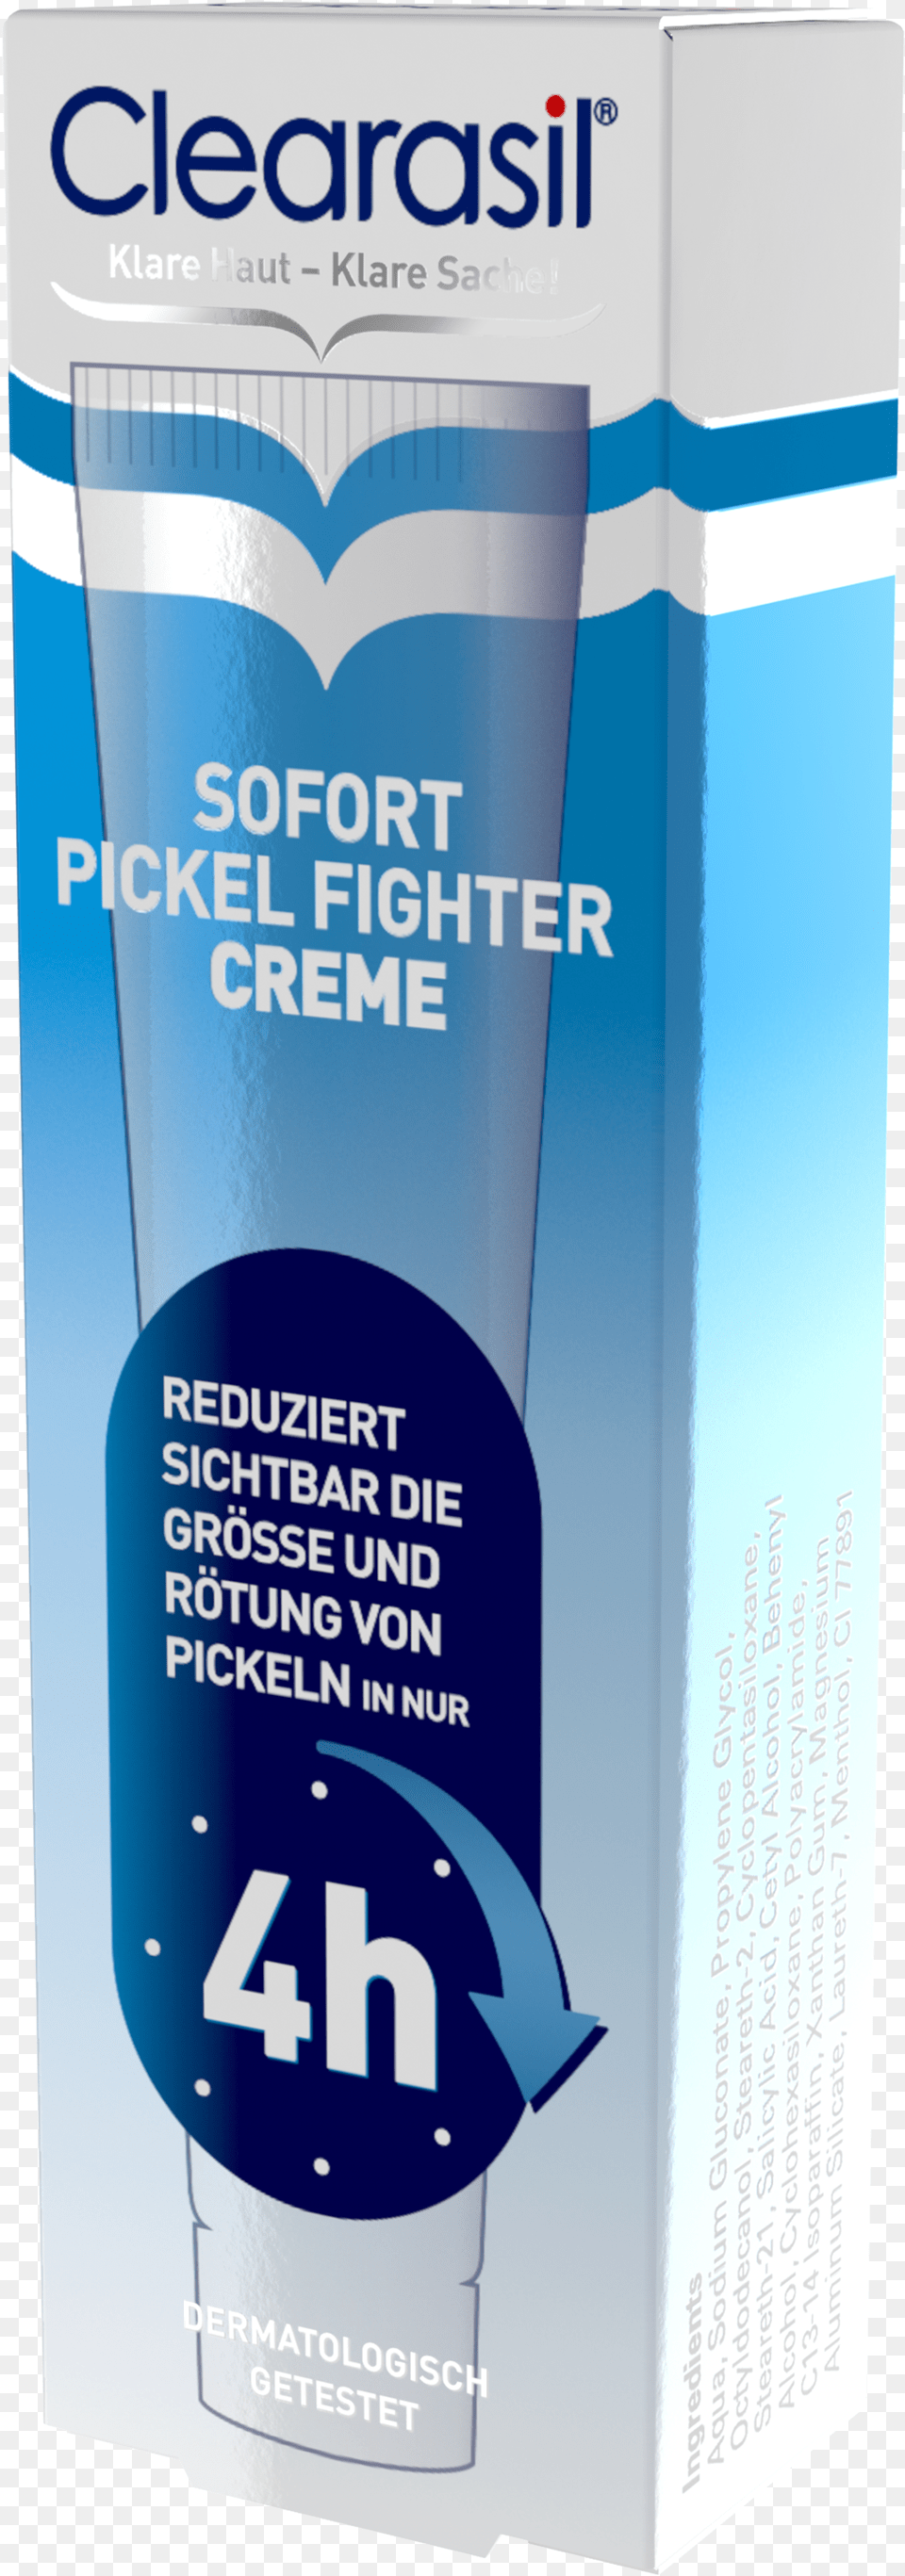 Clearasil Sofort Pickel Fighter Creme Clearasil, Advertisement, Poster, Bottle, Toothpaste Free Png